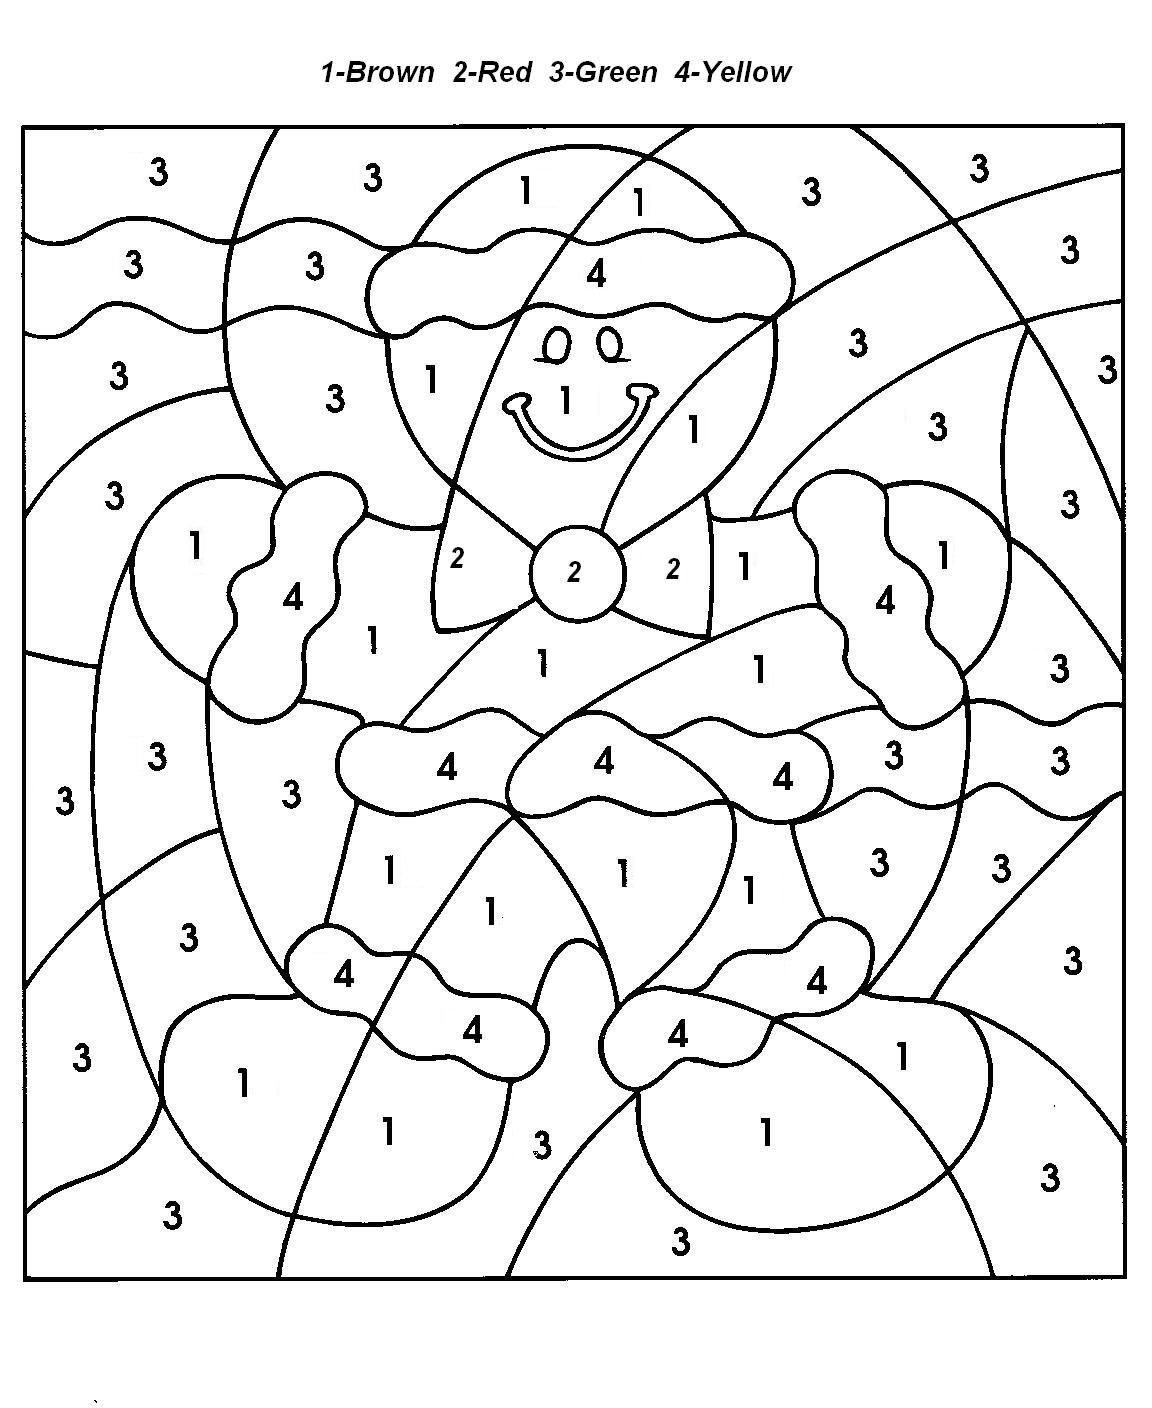 https://www.bestcoloringpagesforkids.com/wp-content/uploads/2017/12/Christmas-Color-By-Numbers-Gingerbread-Man.jpg